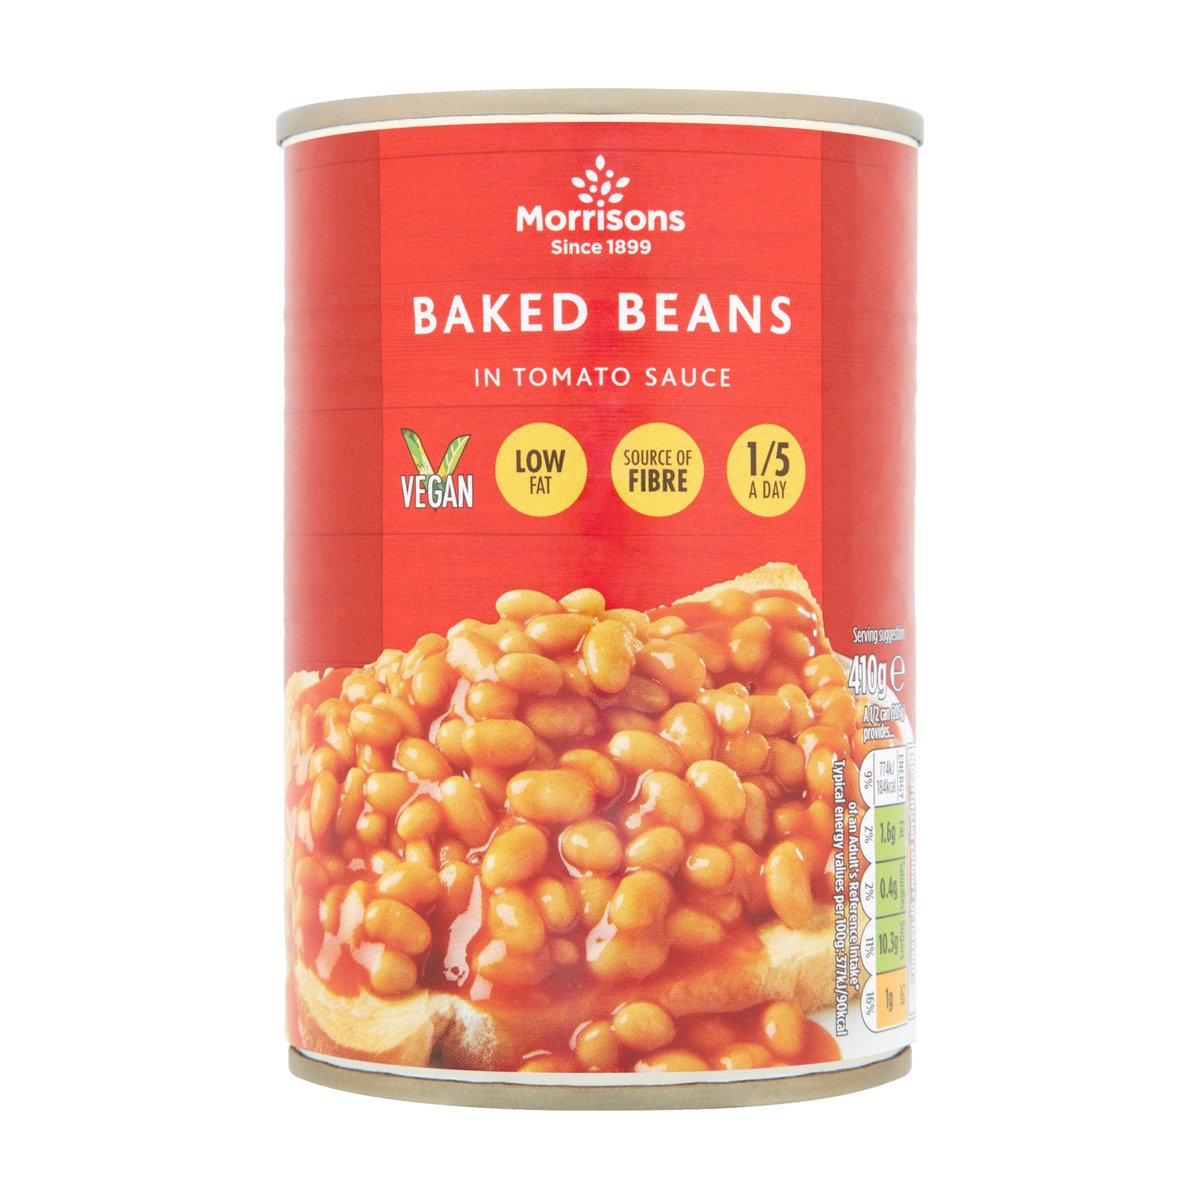 Buy Morrisons Baked Beans In Tomato Sauce 410 g Online at Best Price | Canned Baked Beans | Lulu UAE in UAE